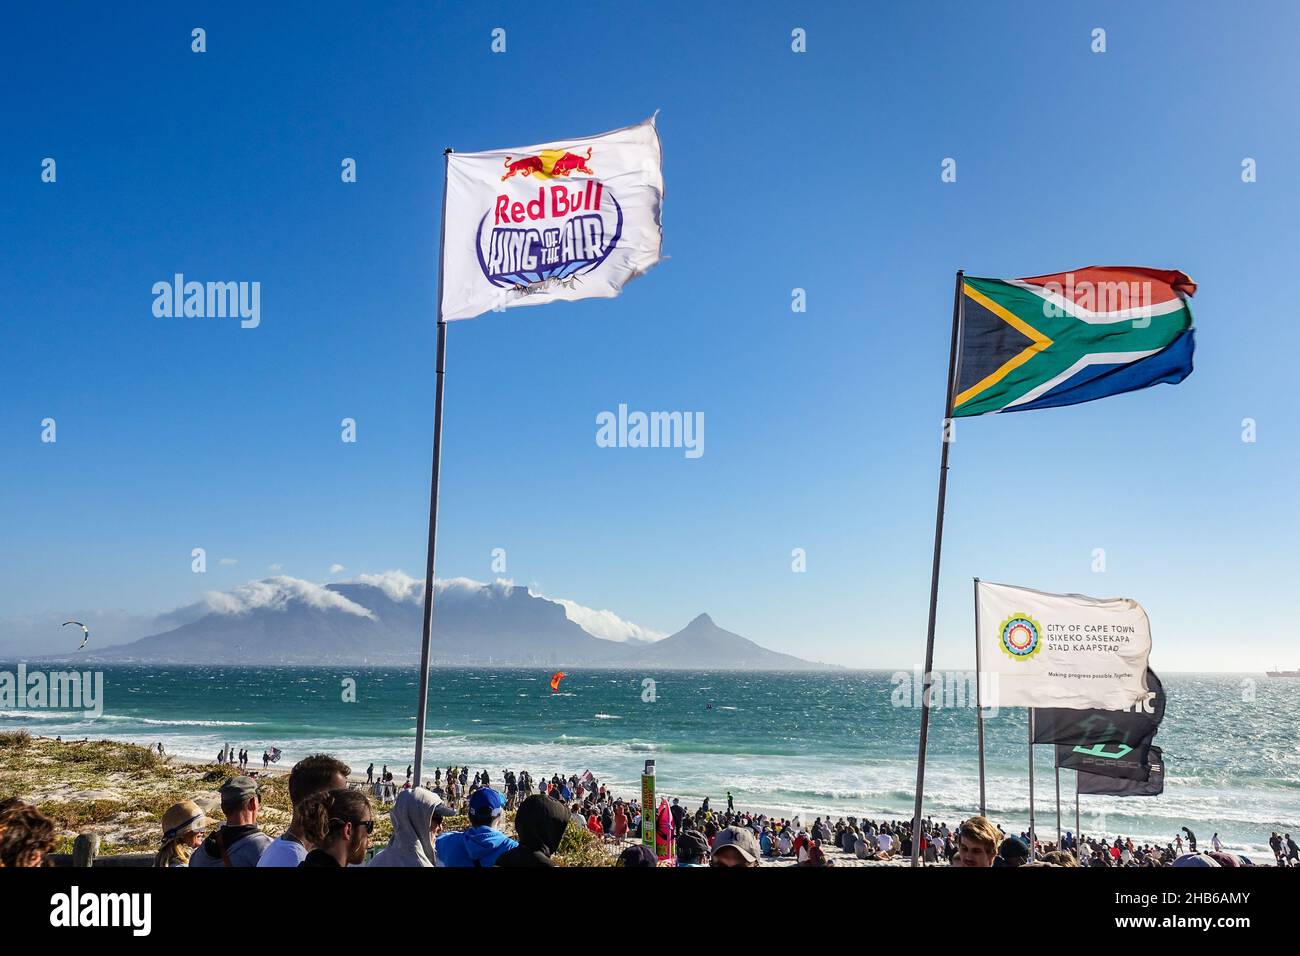 Red Bull flag and other flags flying in the air at during the Red Bull King of the Air 2021 in Blouberg, Cape Town, South Africa Stock Photo